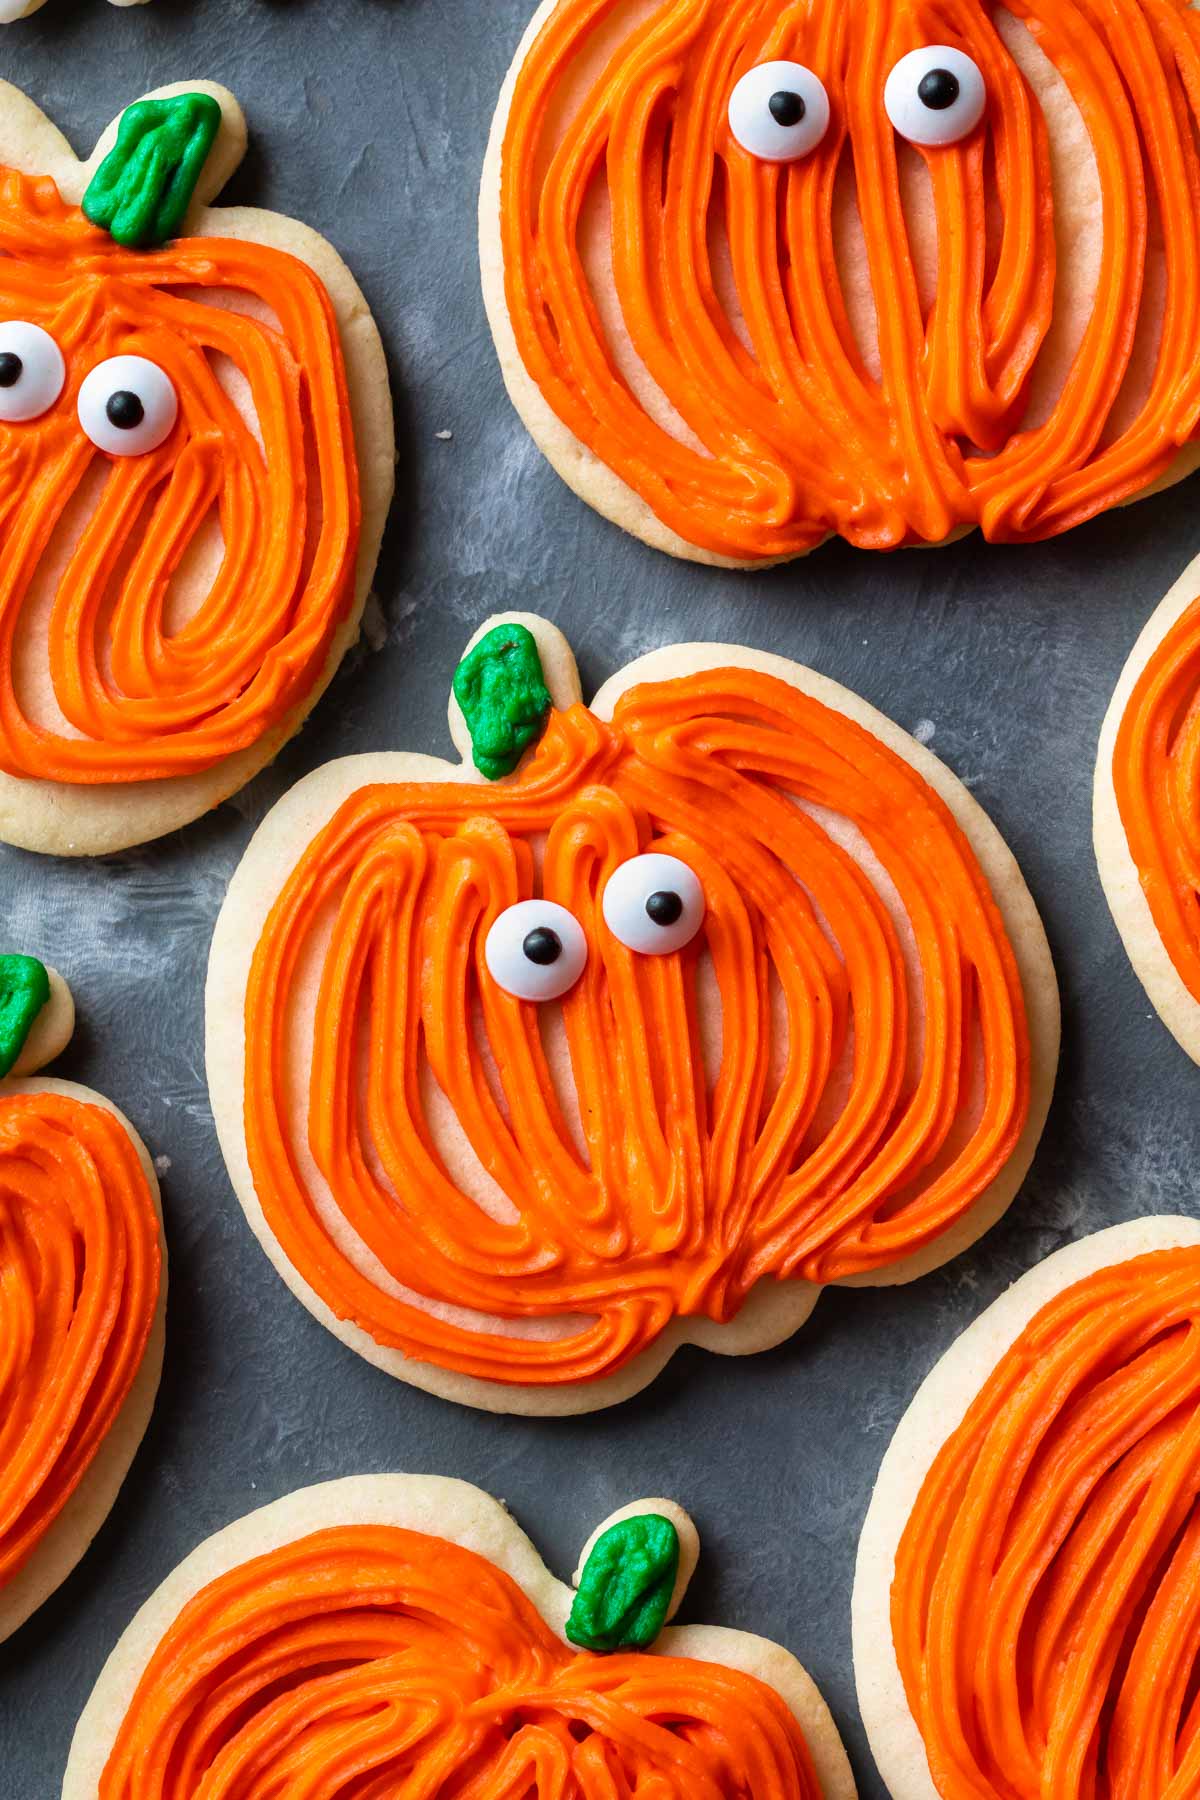 sugar cookies decorated to look like pumpkins with orange frosting and candy eyes